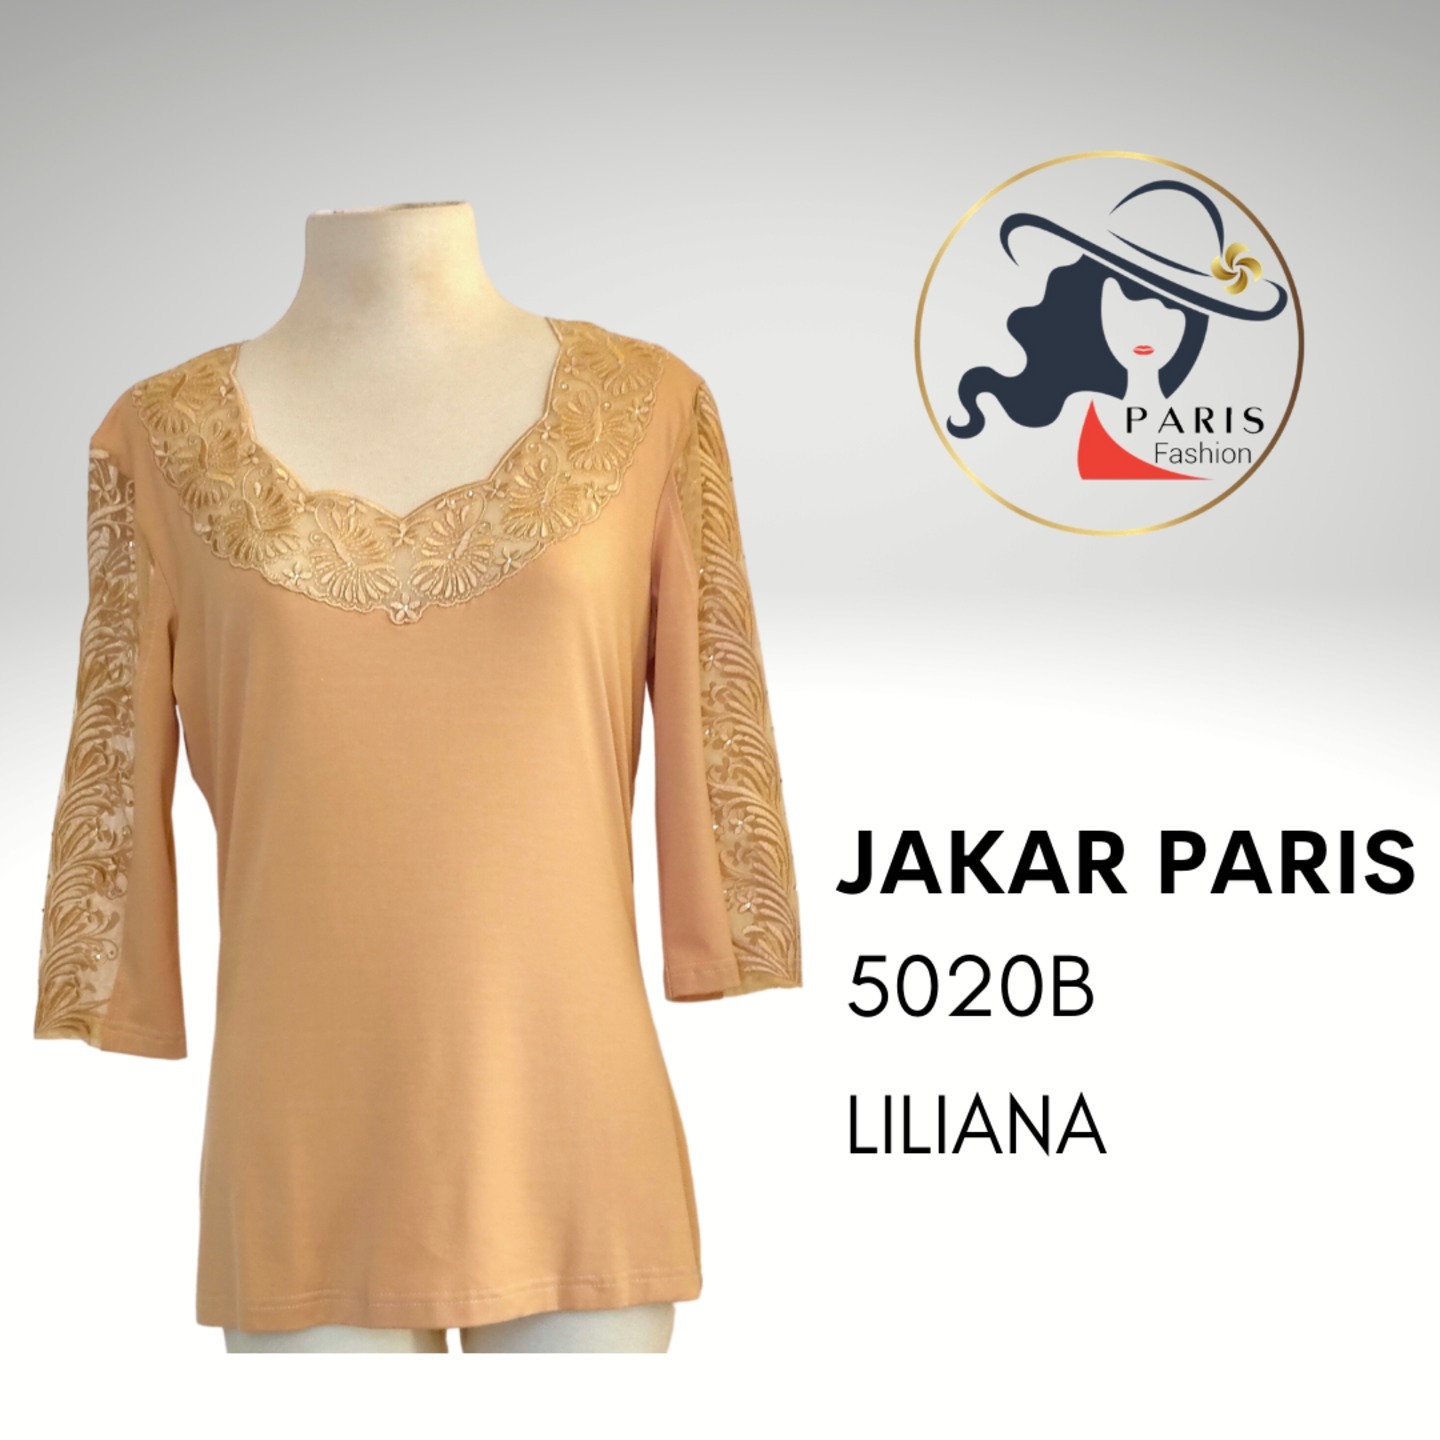 JAKAR PARIS 5020B LILIANA BEIGE LACE EMBROIDERY TOP WITH SEQUINS